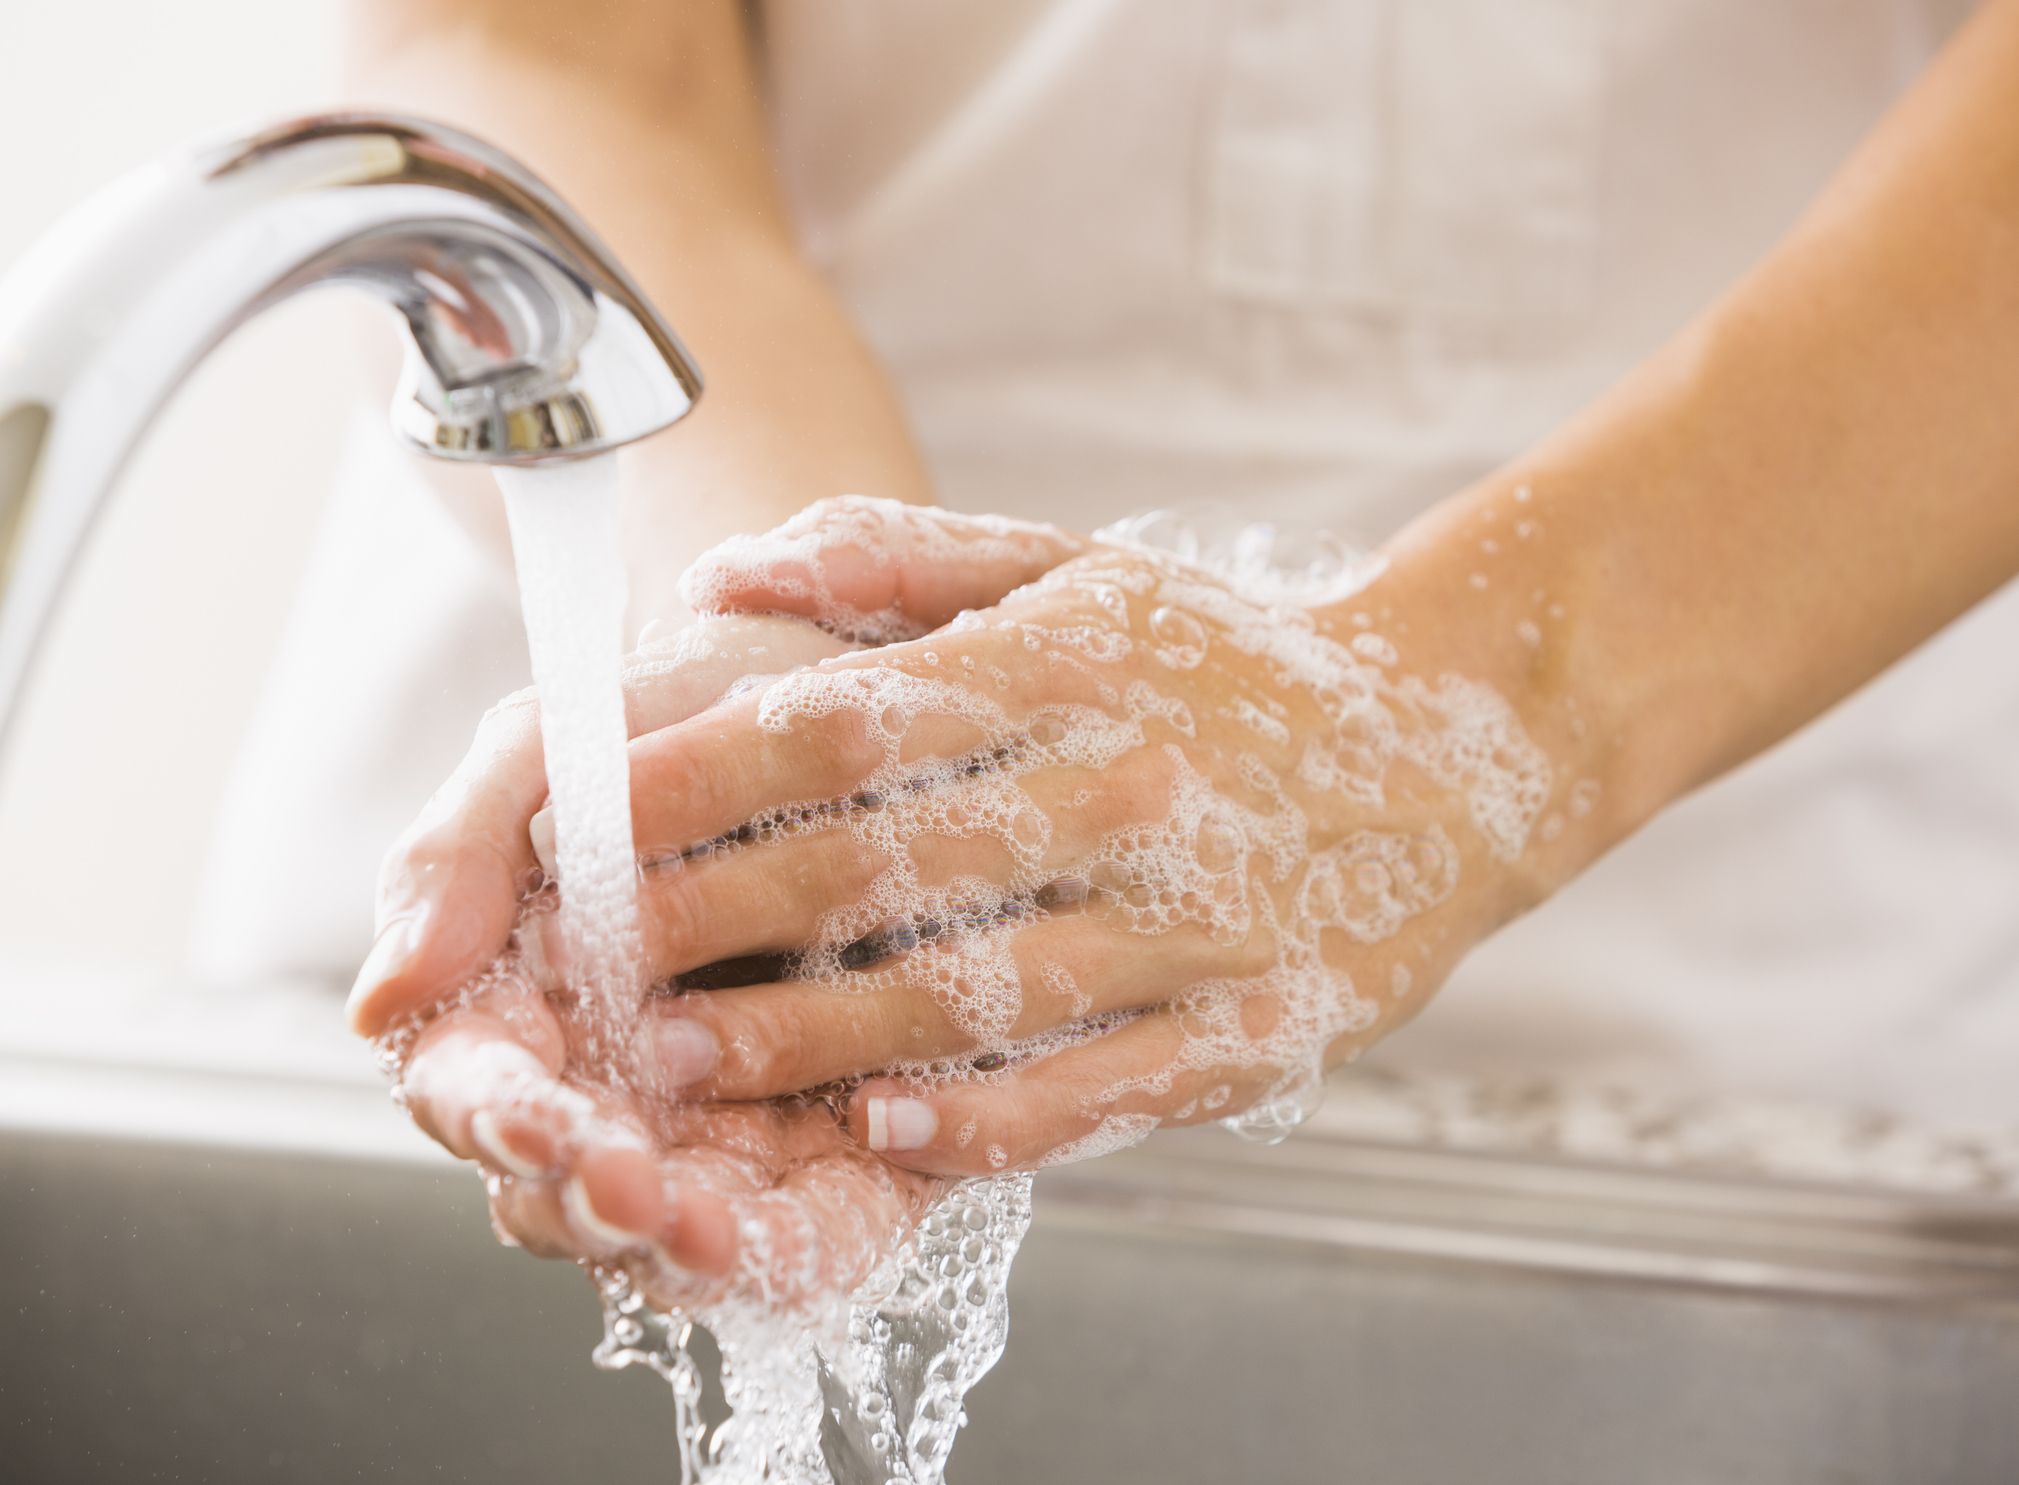 https://hips.hearstapps.com/hmg-prod/images/how-to-wash-your-hands-1583338761.jpg